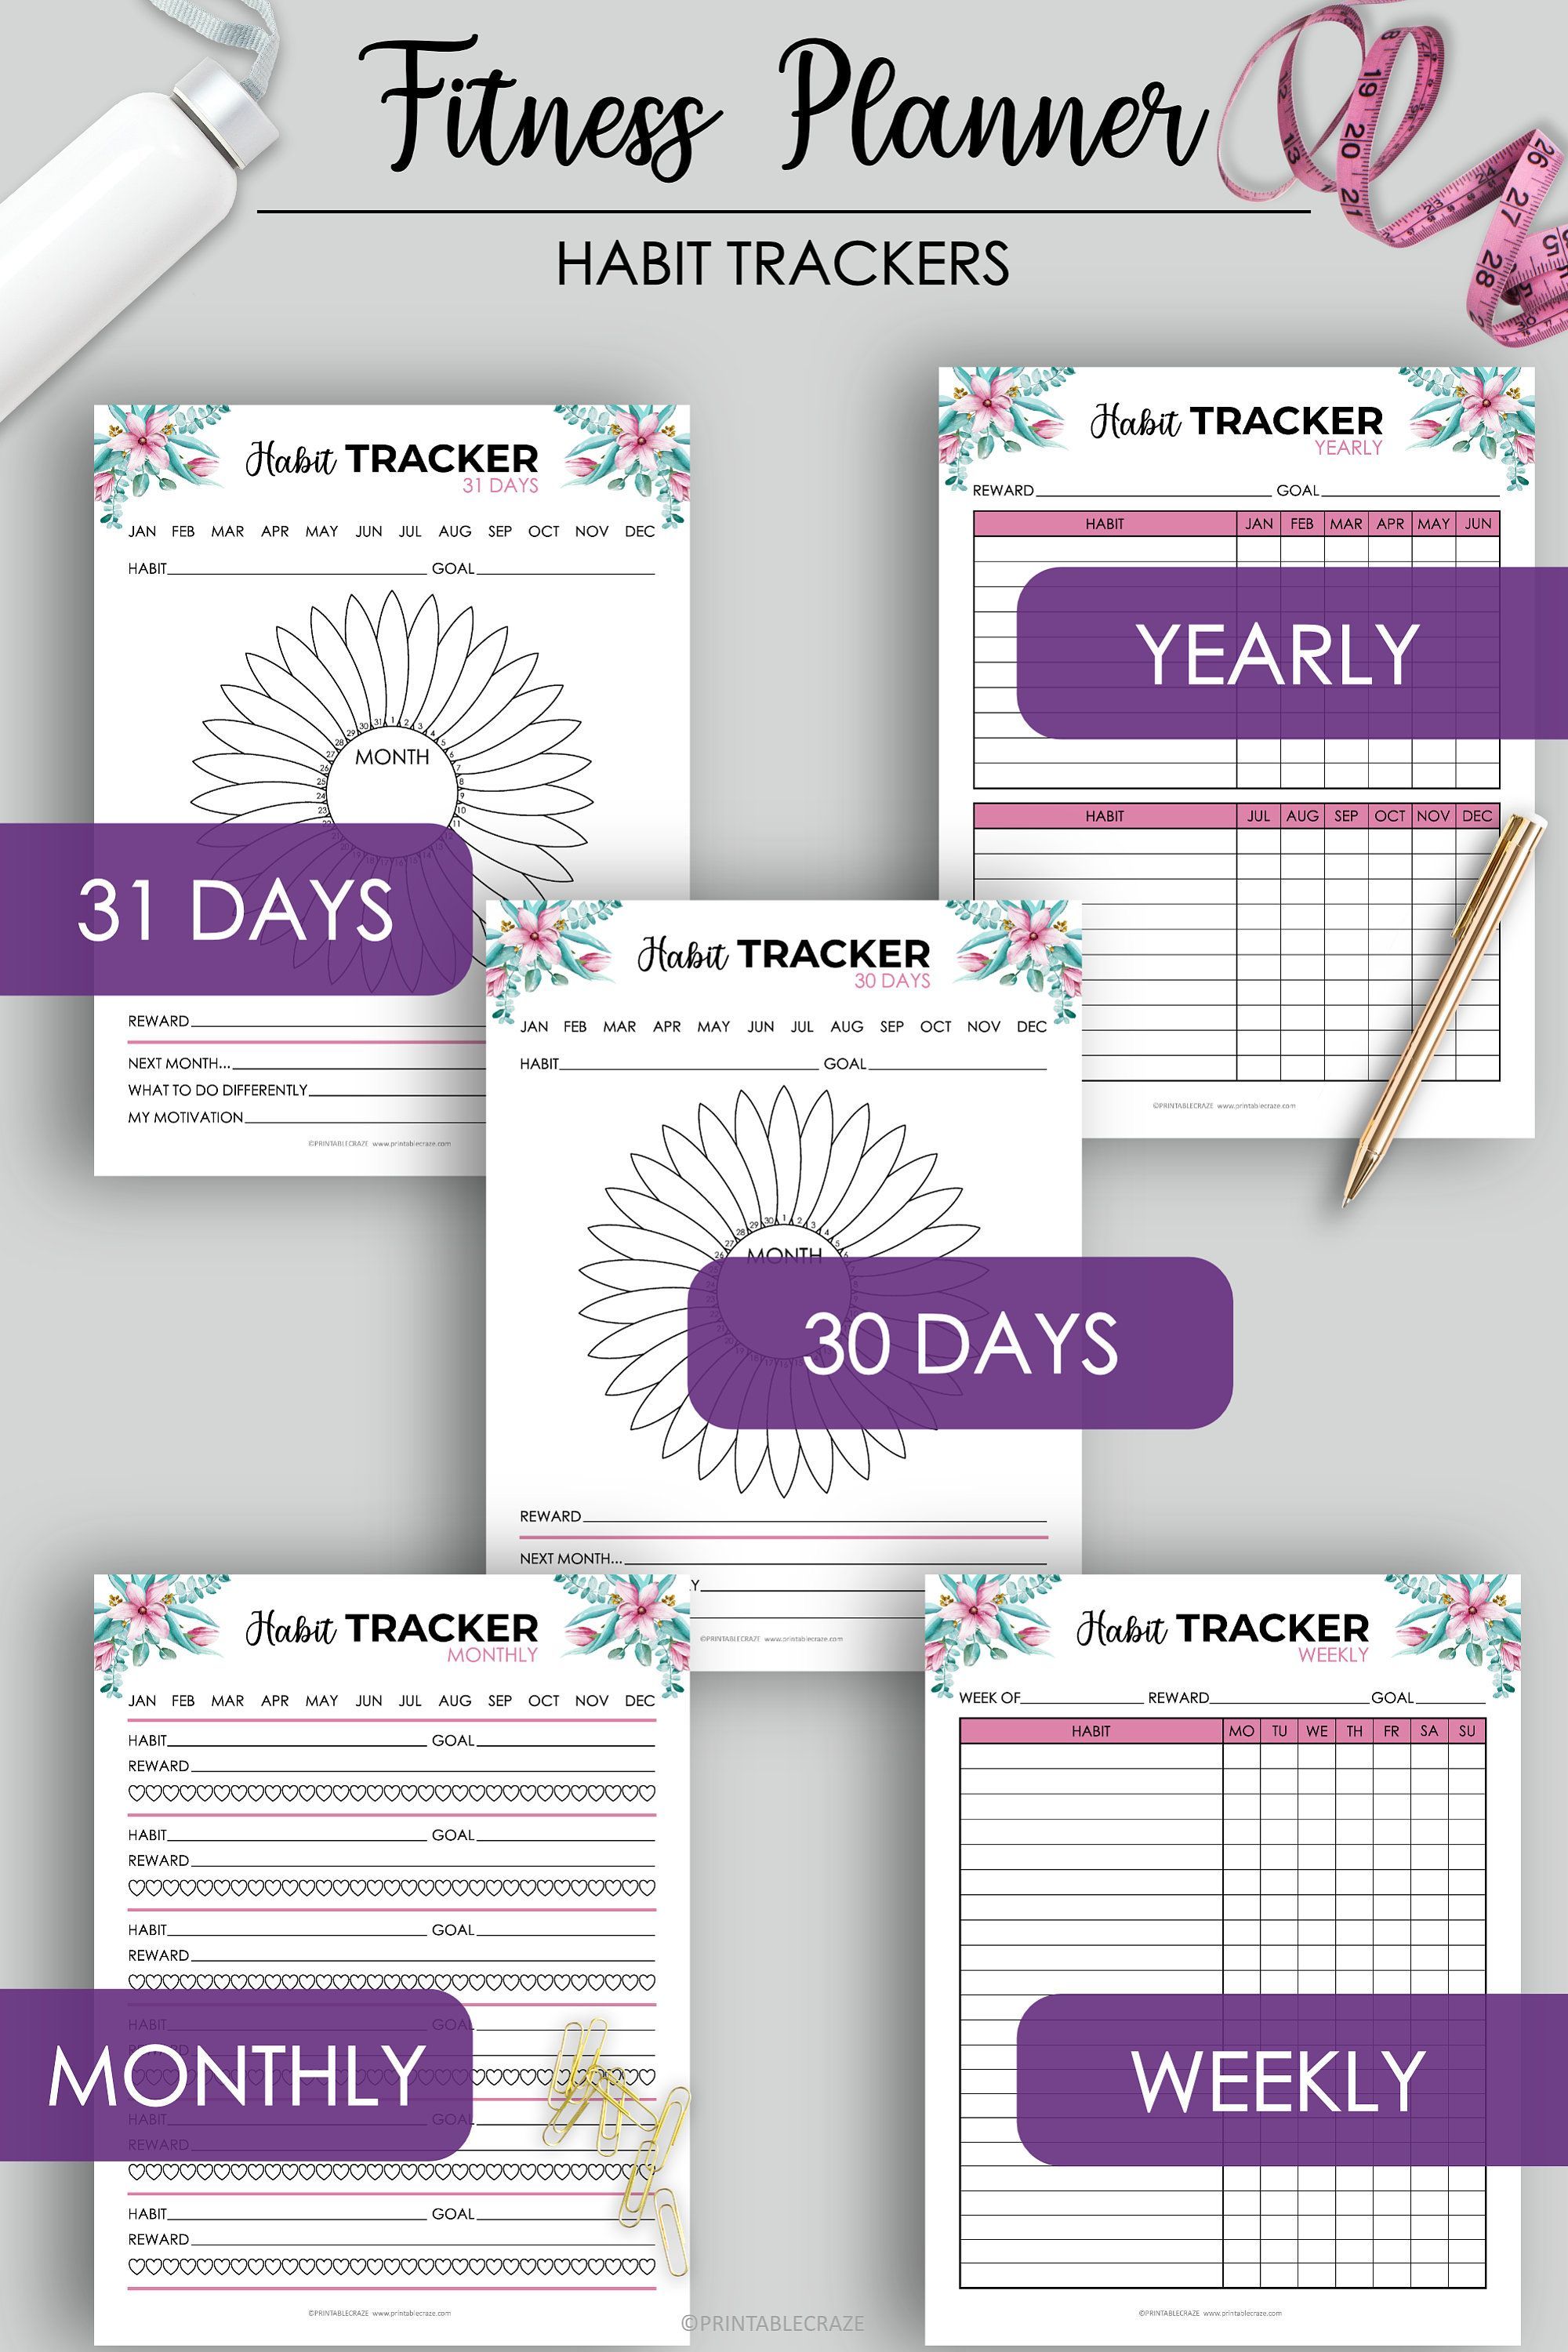 Fitness Planner Printable Weight Loss Health Planner Fitness | Etsy - Fitness Planner Printable Weight Loss Health Planner Fitness | Etsy -   14 fitness Planner 2019 ideas